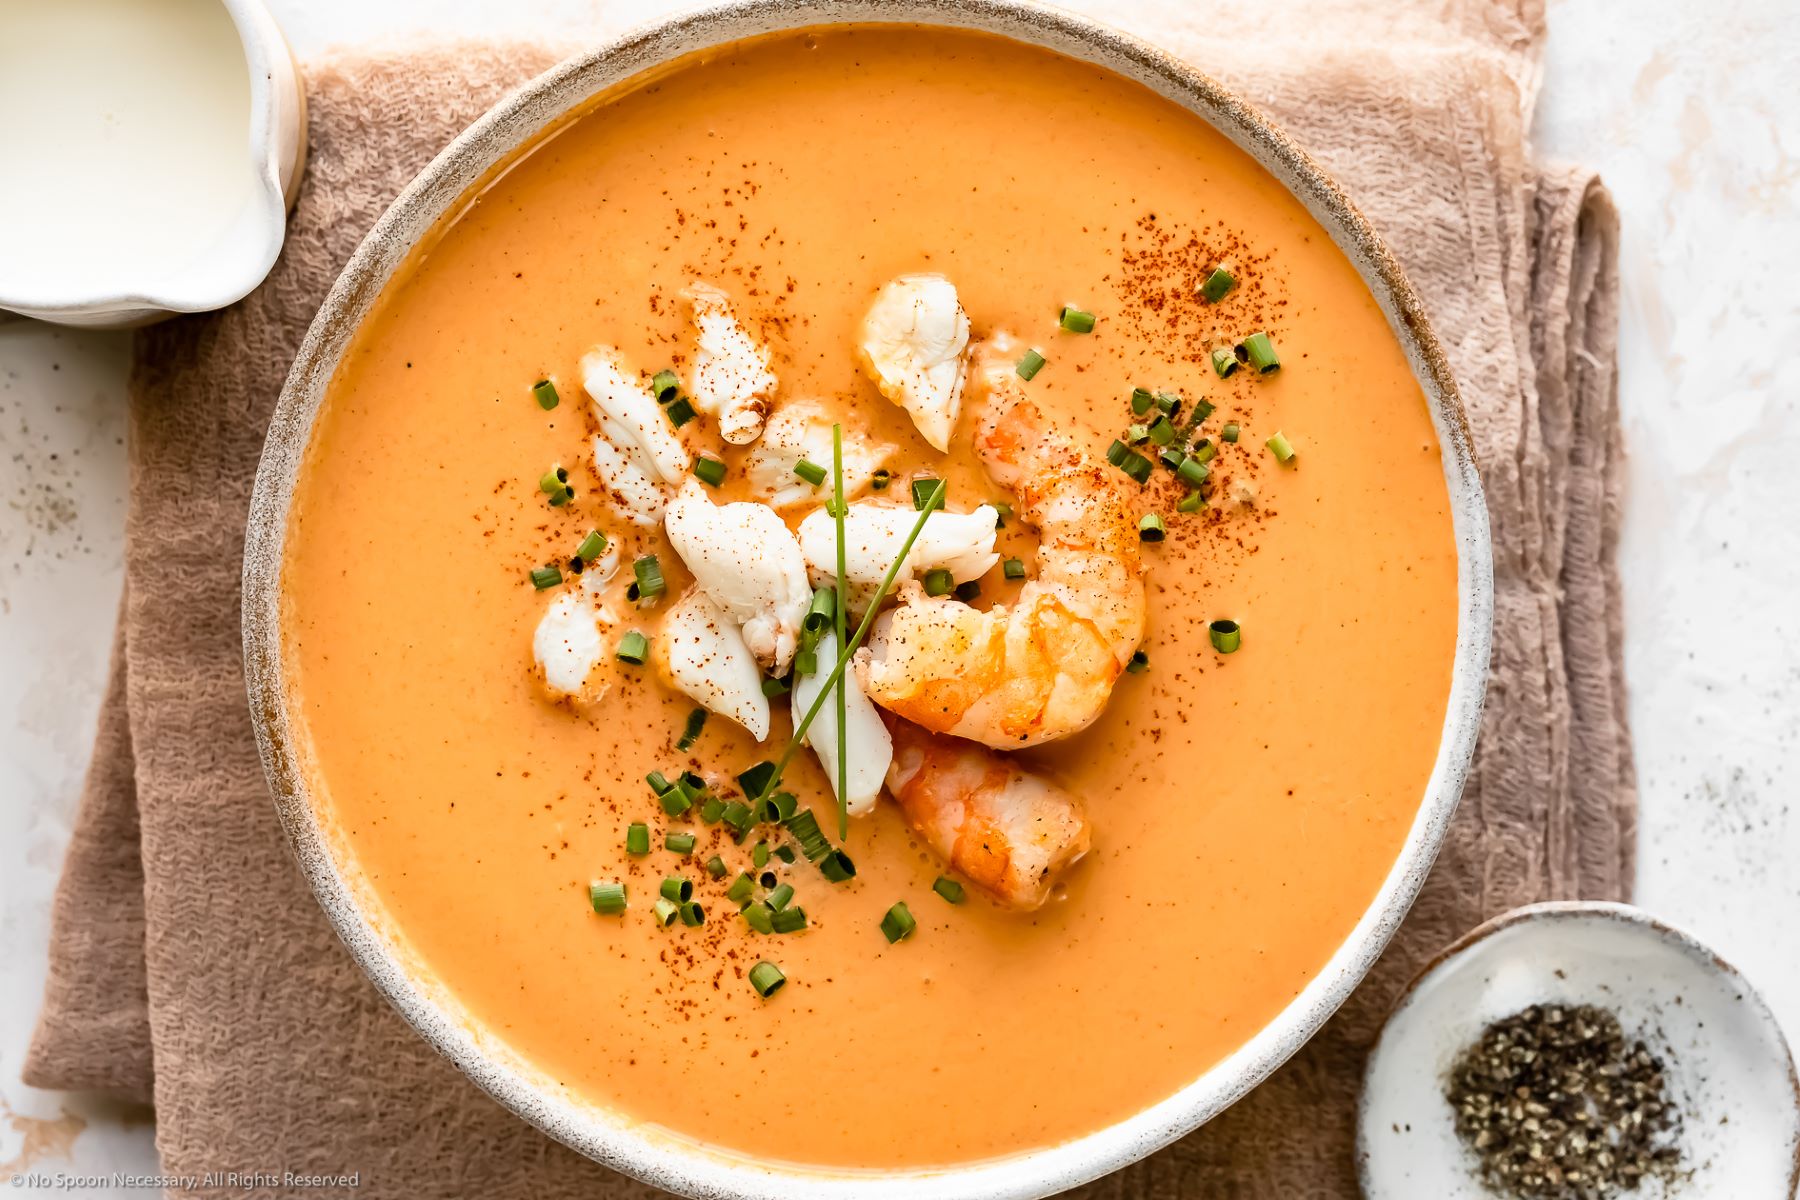 20-bisque-nutrition-facts